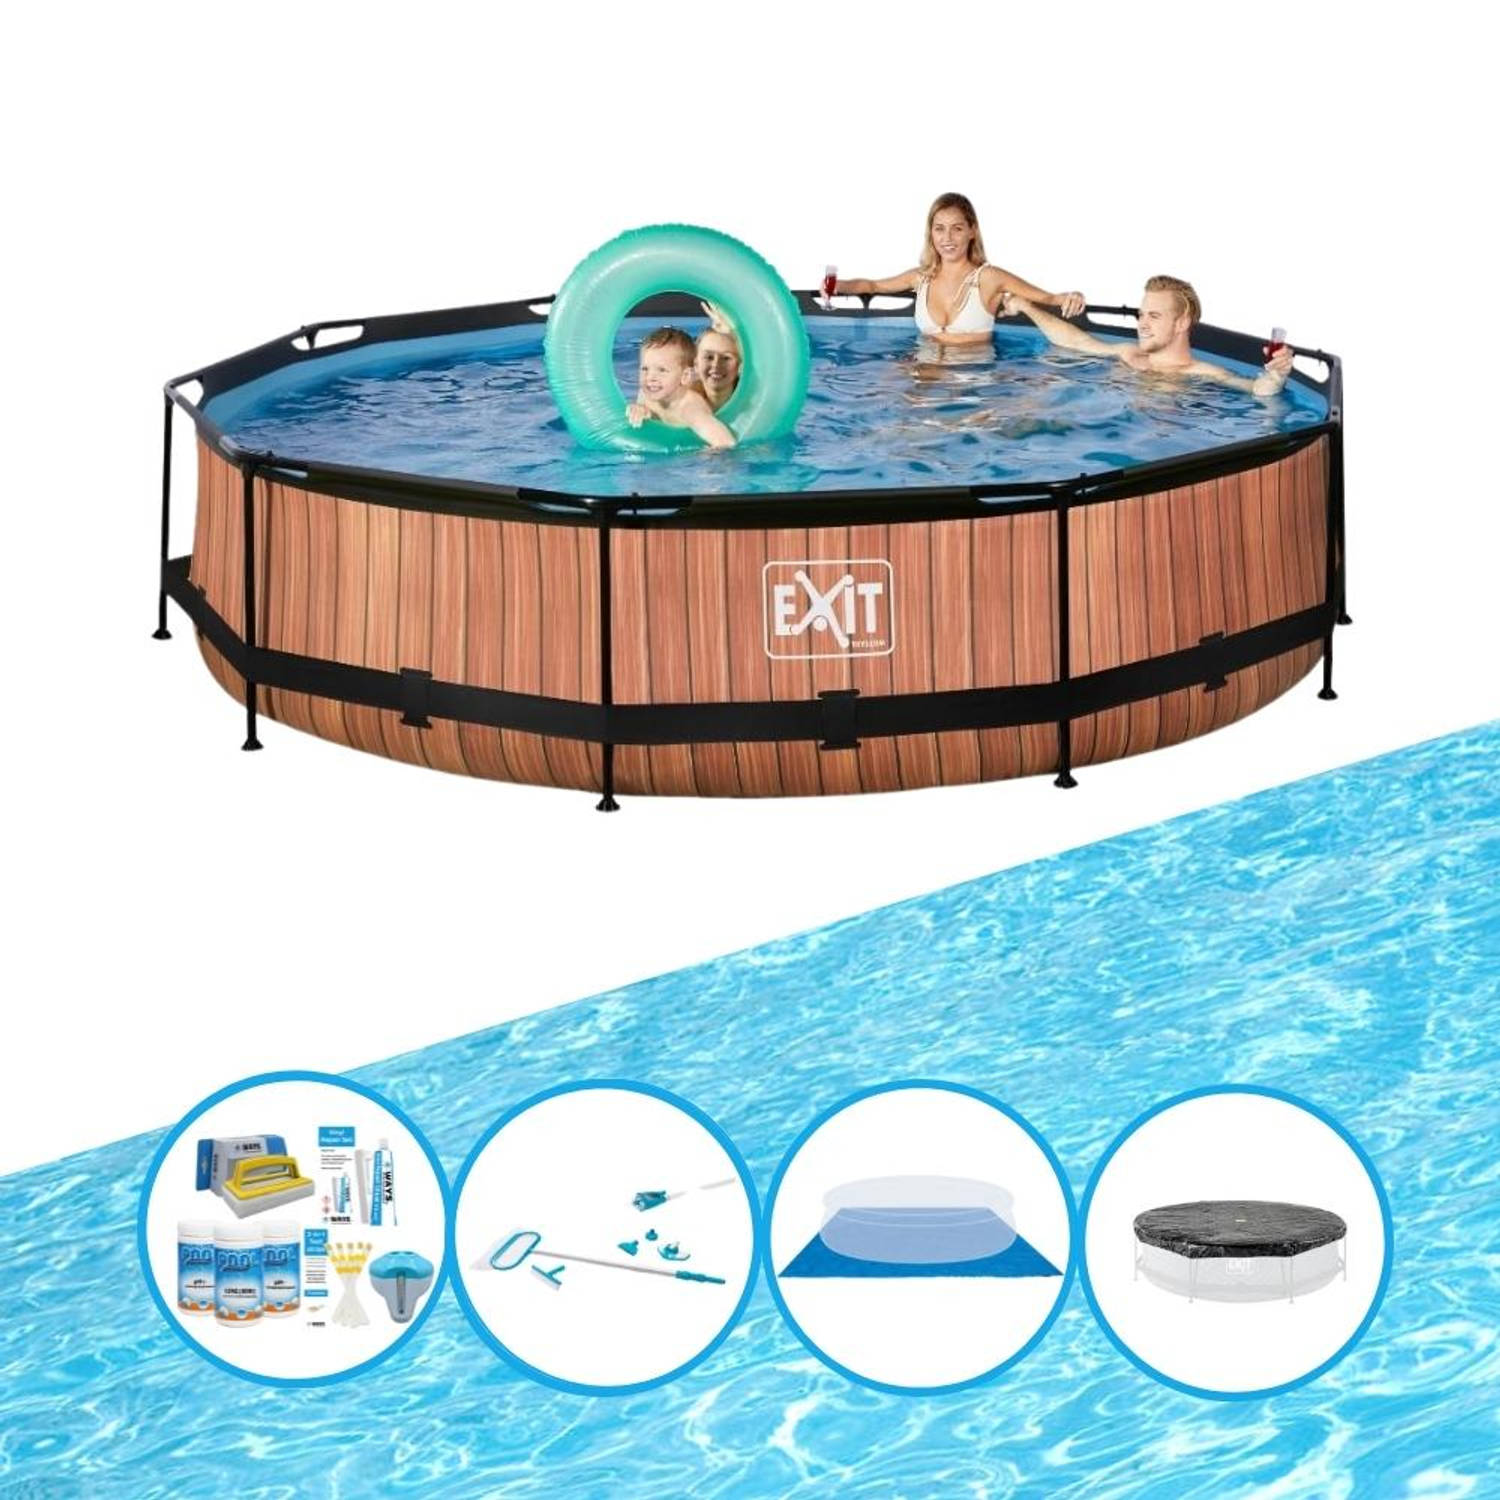 Exit Zwembad Timber Style Frame Pool ø360x76cm Compleet Zwembadpakket